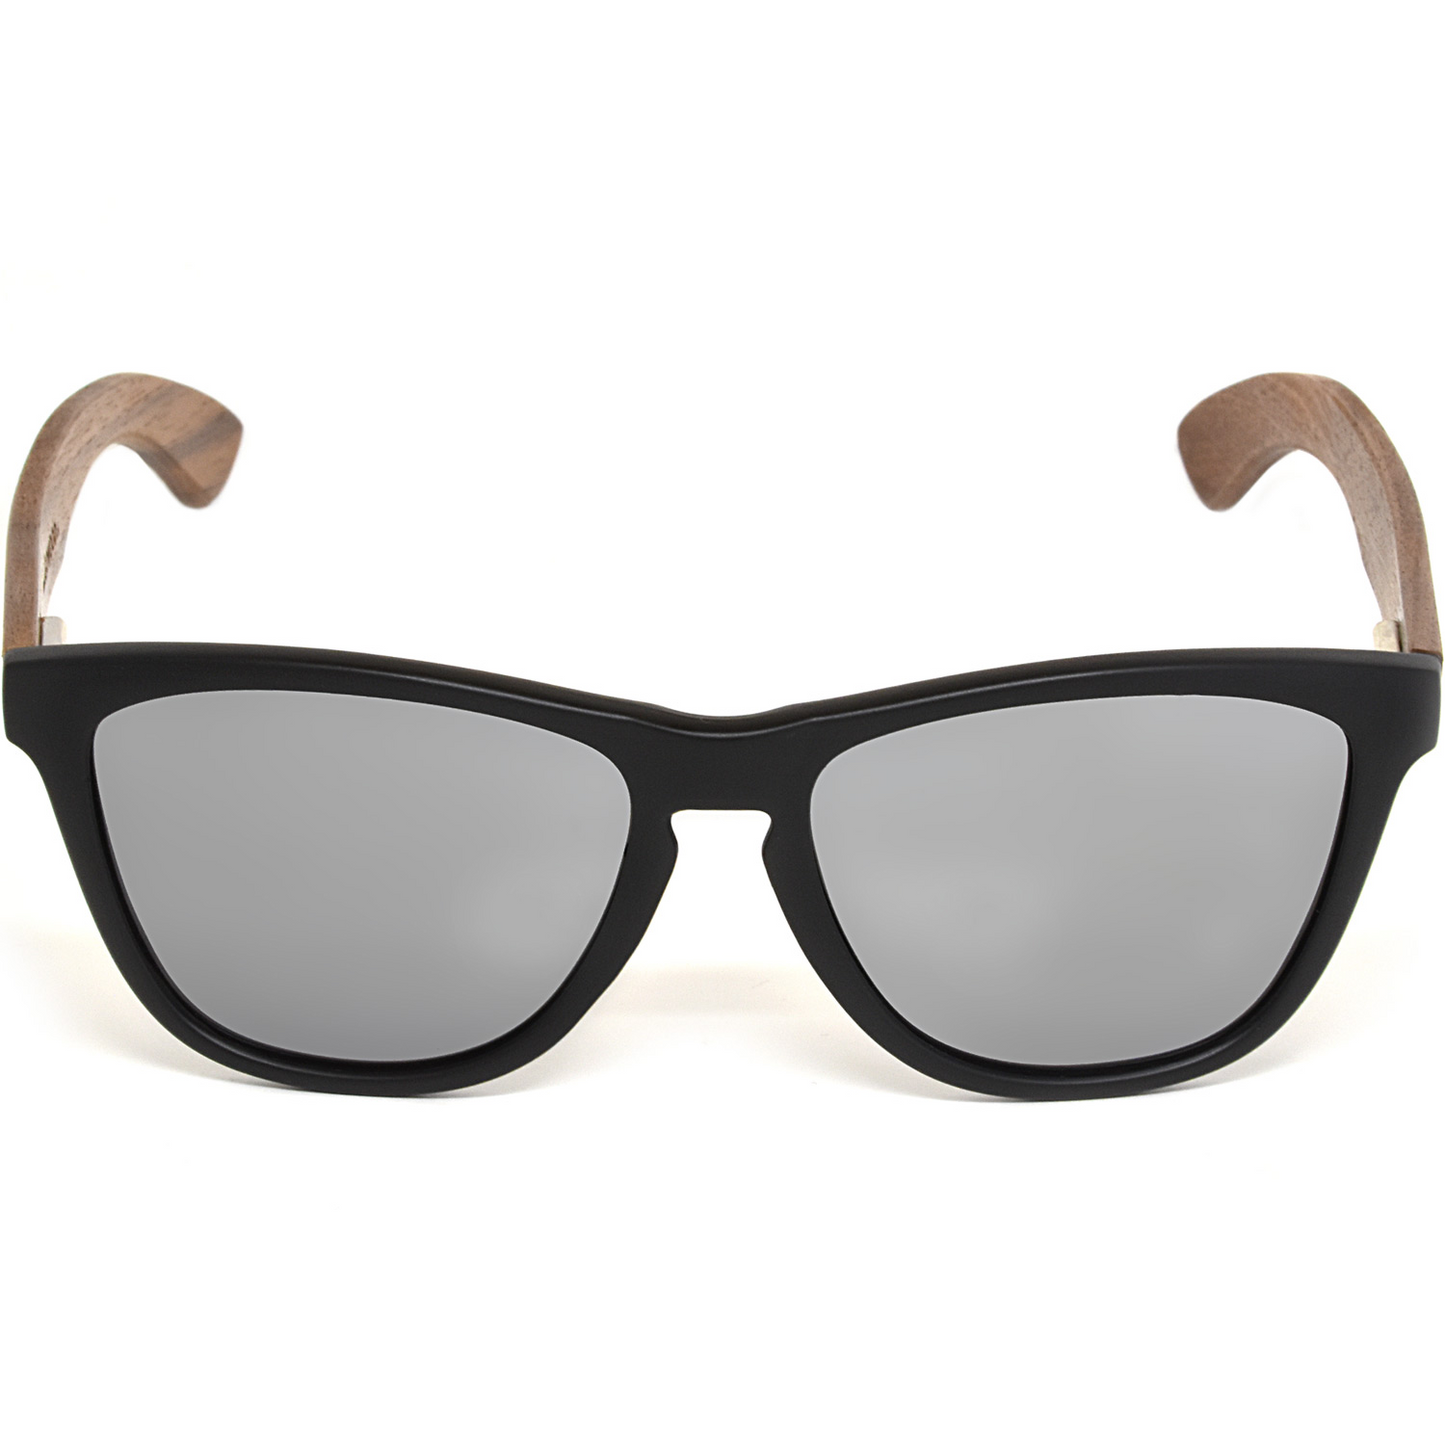 Classic walnut wood sunglasses with silver mirrored polarized lenses